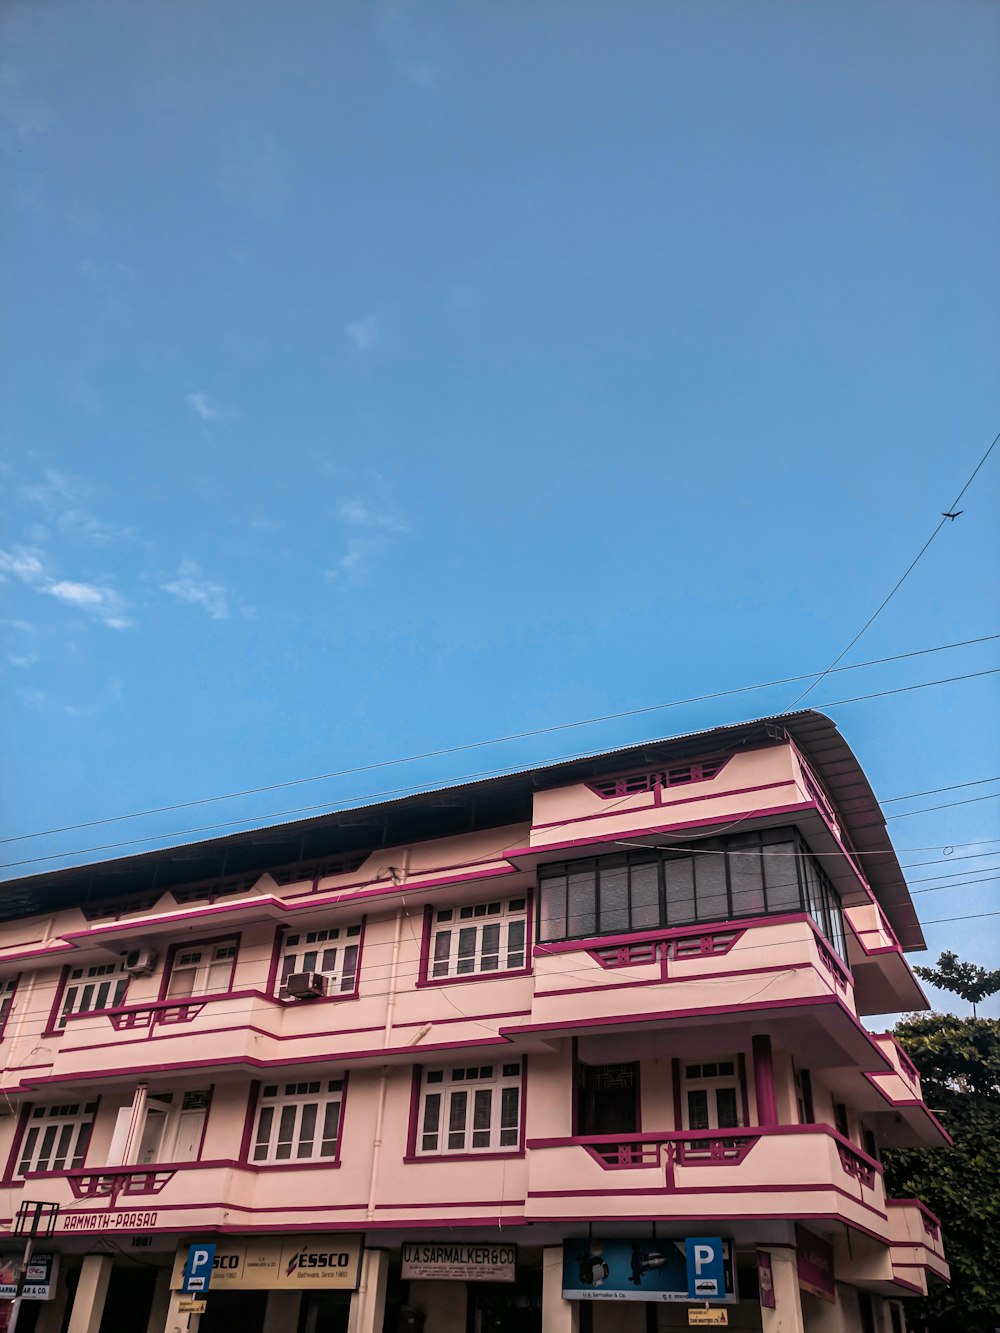 pink building under blue and white sky